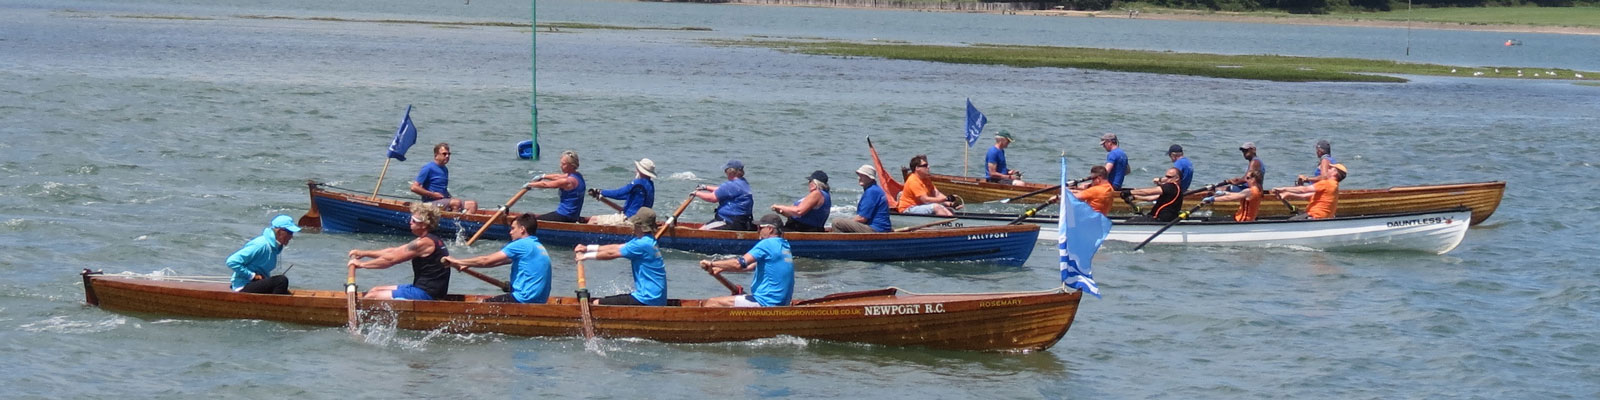 round hayling rowing race